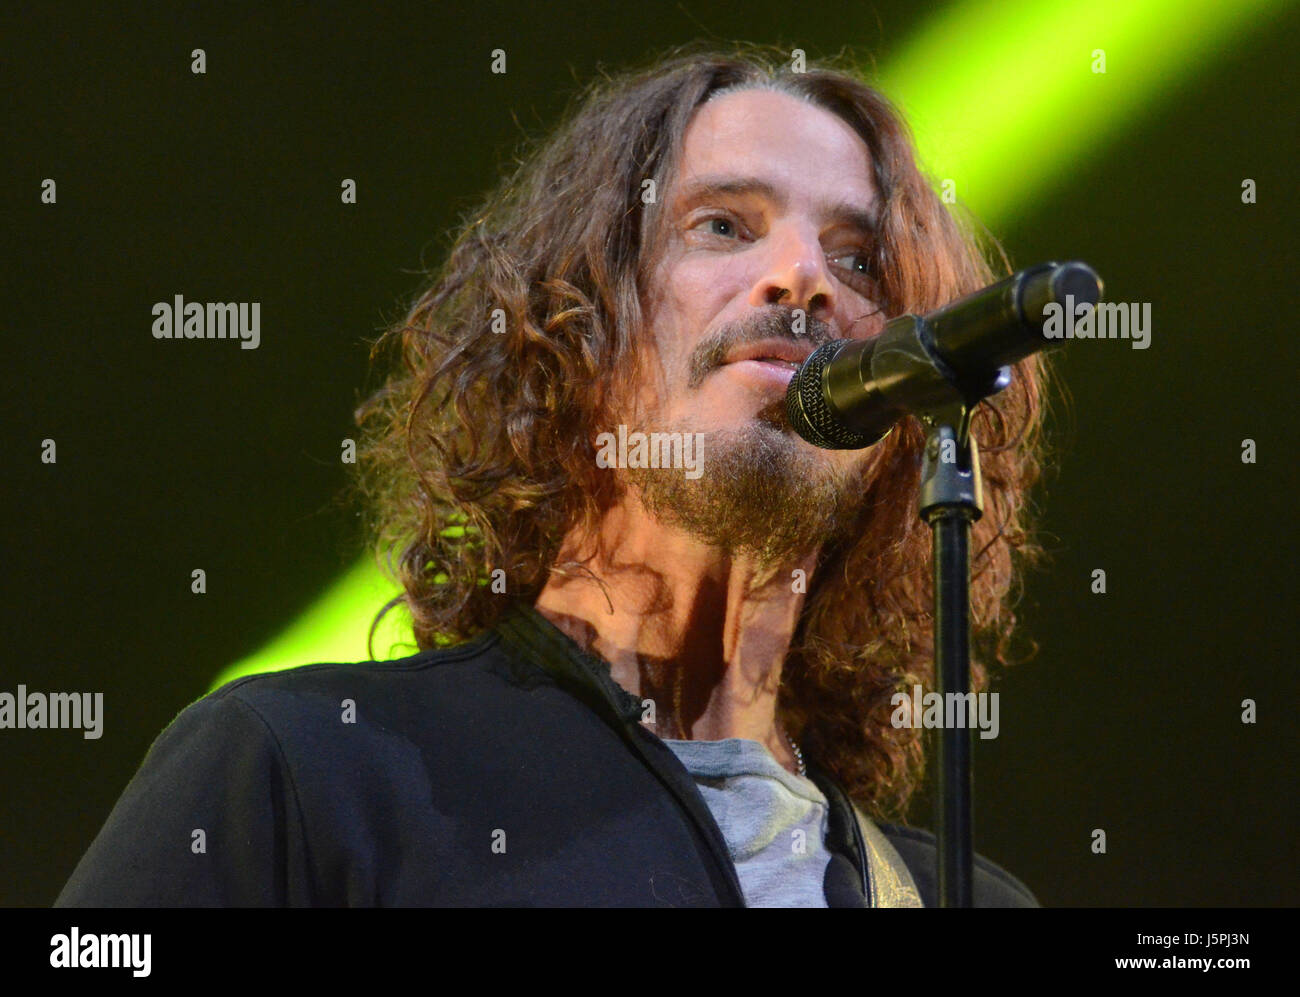 May 13, 2017: Singer and songwriter Chris Cornell performs with his band Soundgarden during the Northern Invasion Music Festival in Somerset, Wisconsin. Ricky Bassman/Cal Sport Media Stock Photo